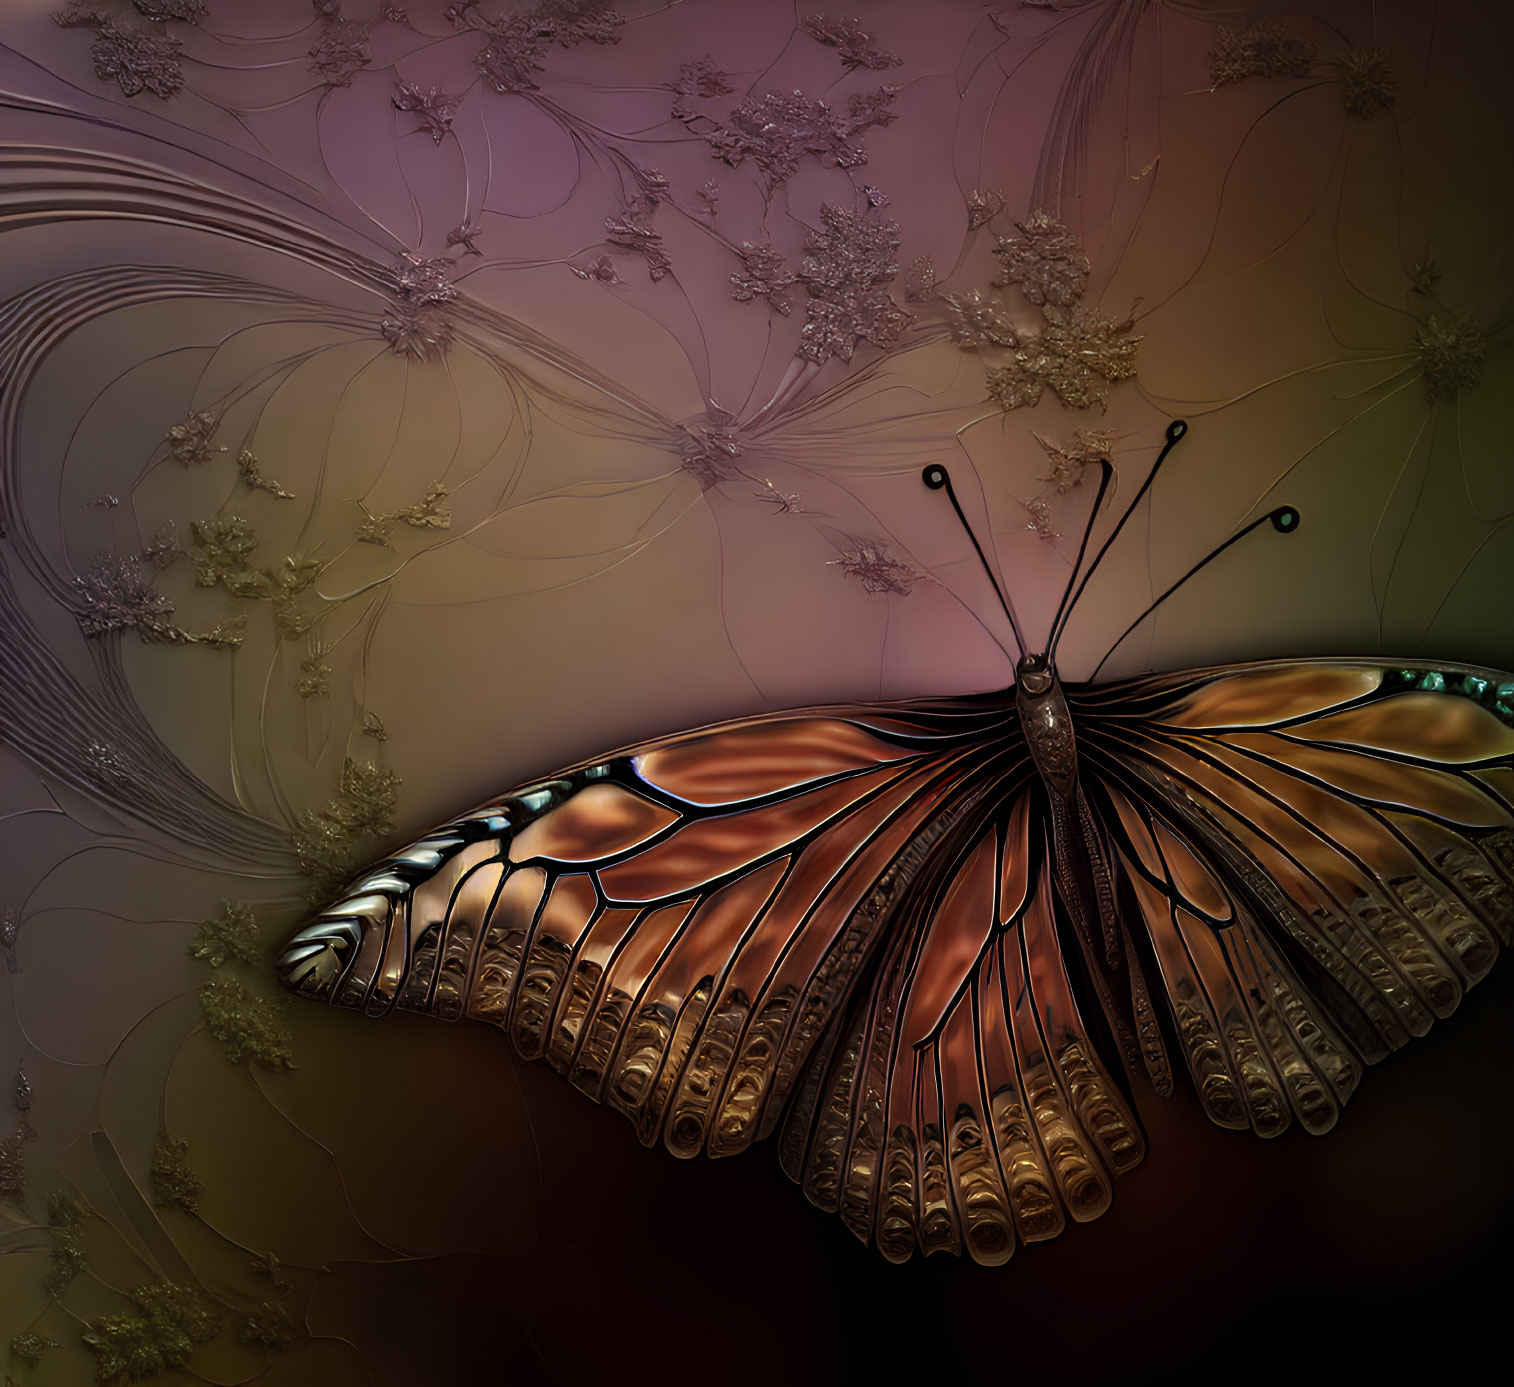 Digital artwork of butterfly with fractal wings on abstract dark background